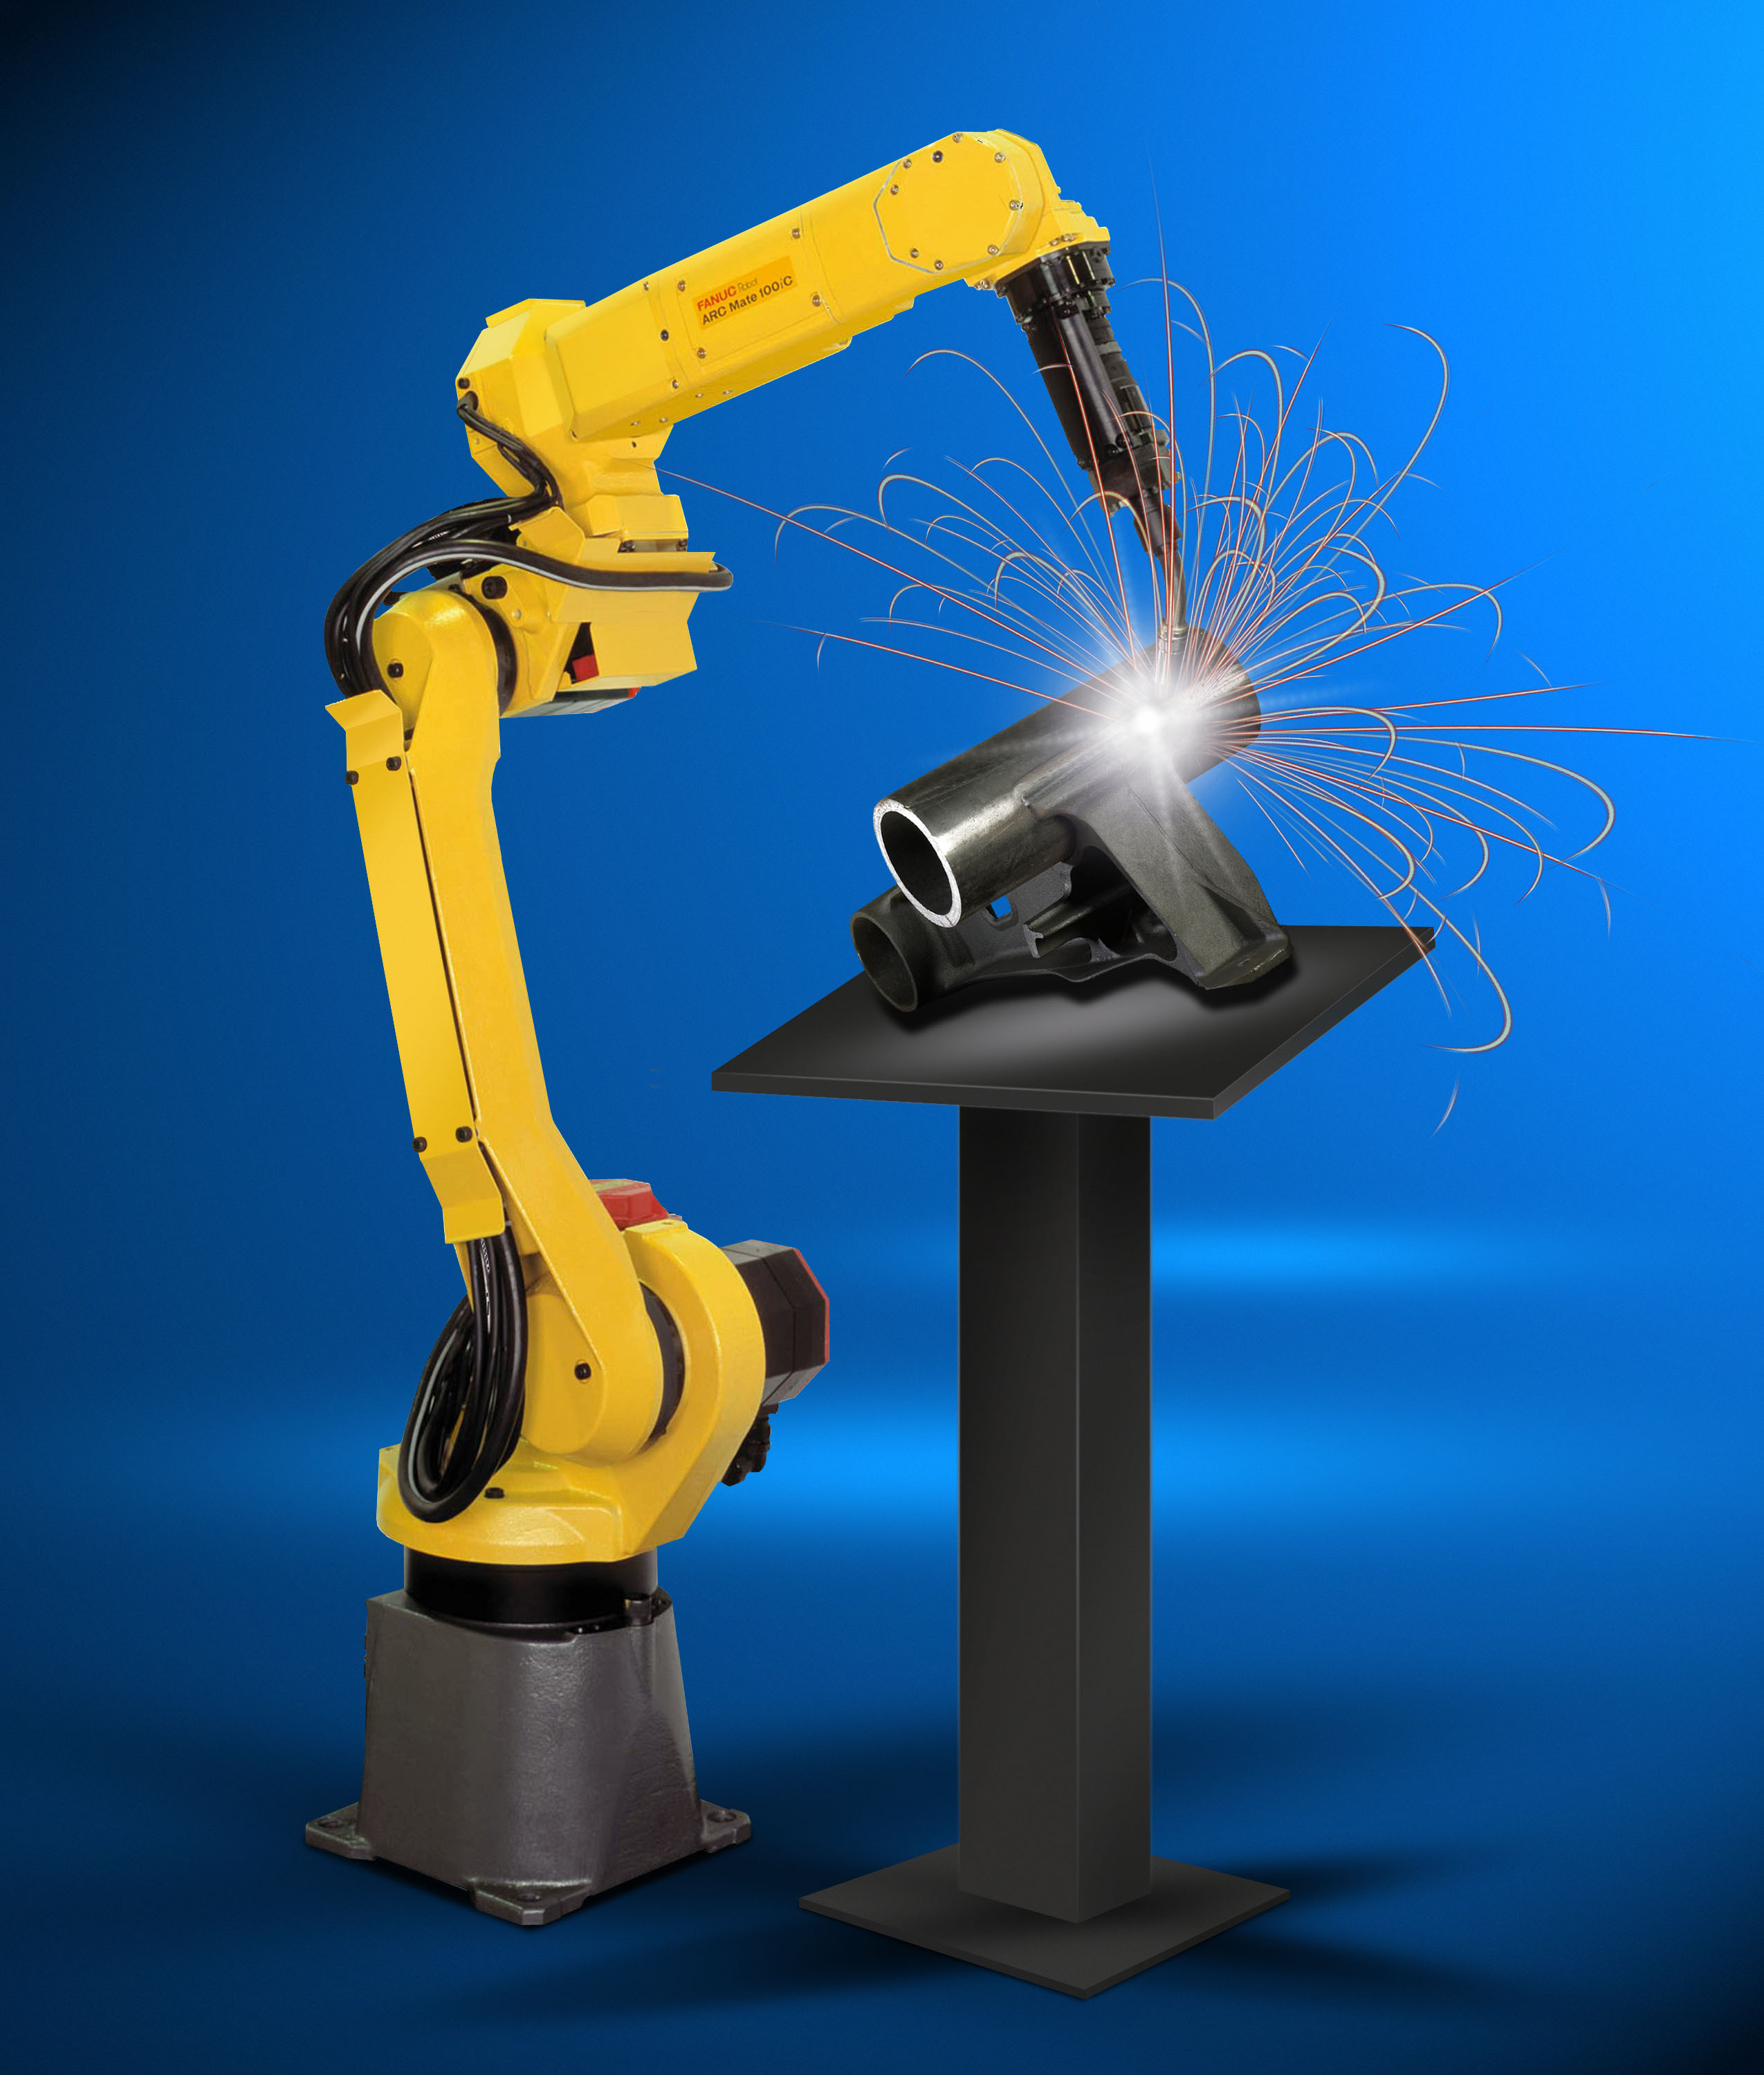 New ARCMate weld robot gets fully integrated ‘base to torch’ cable management